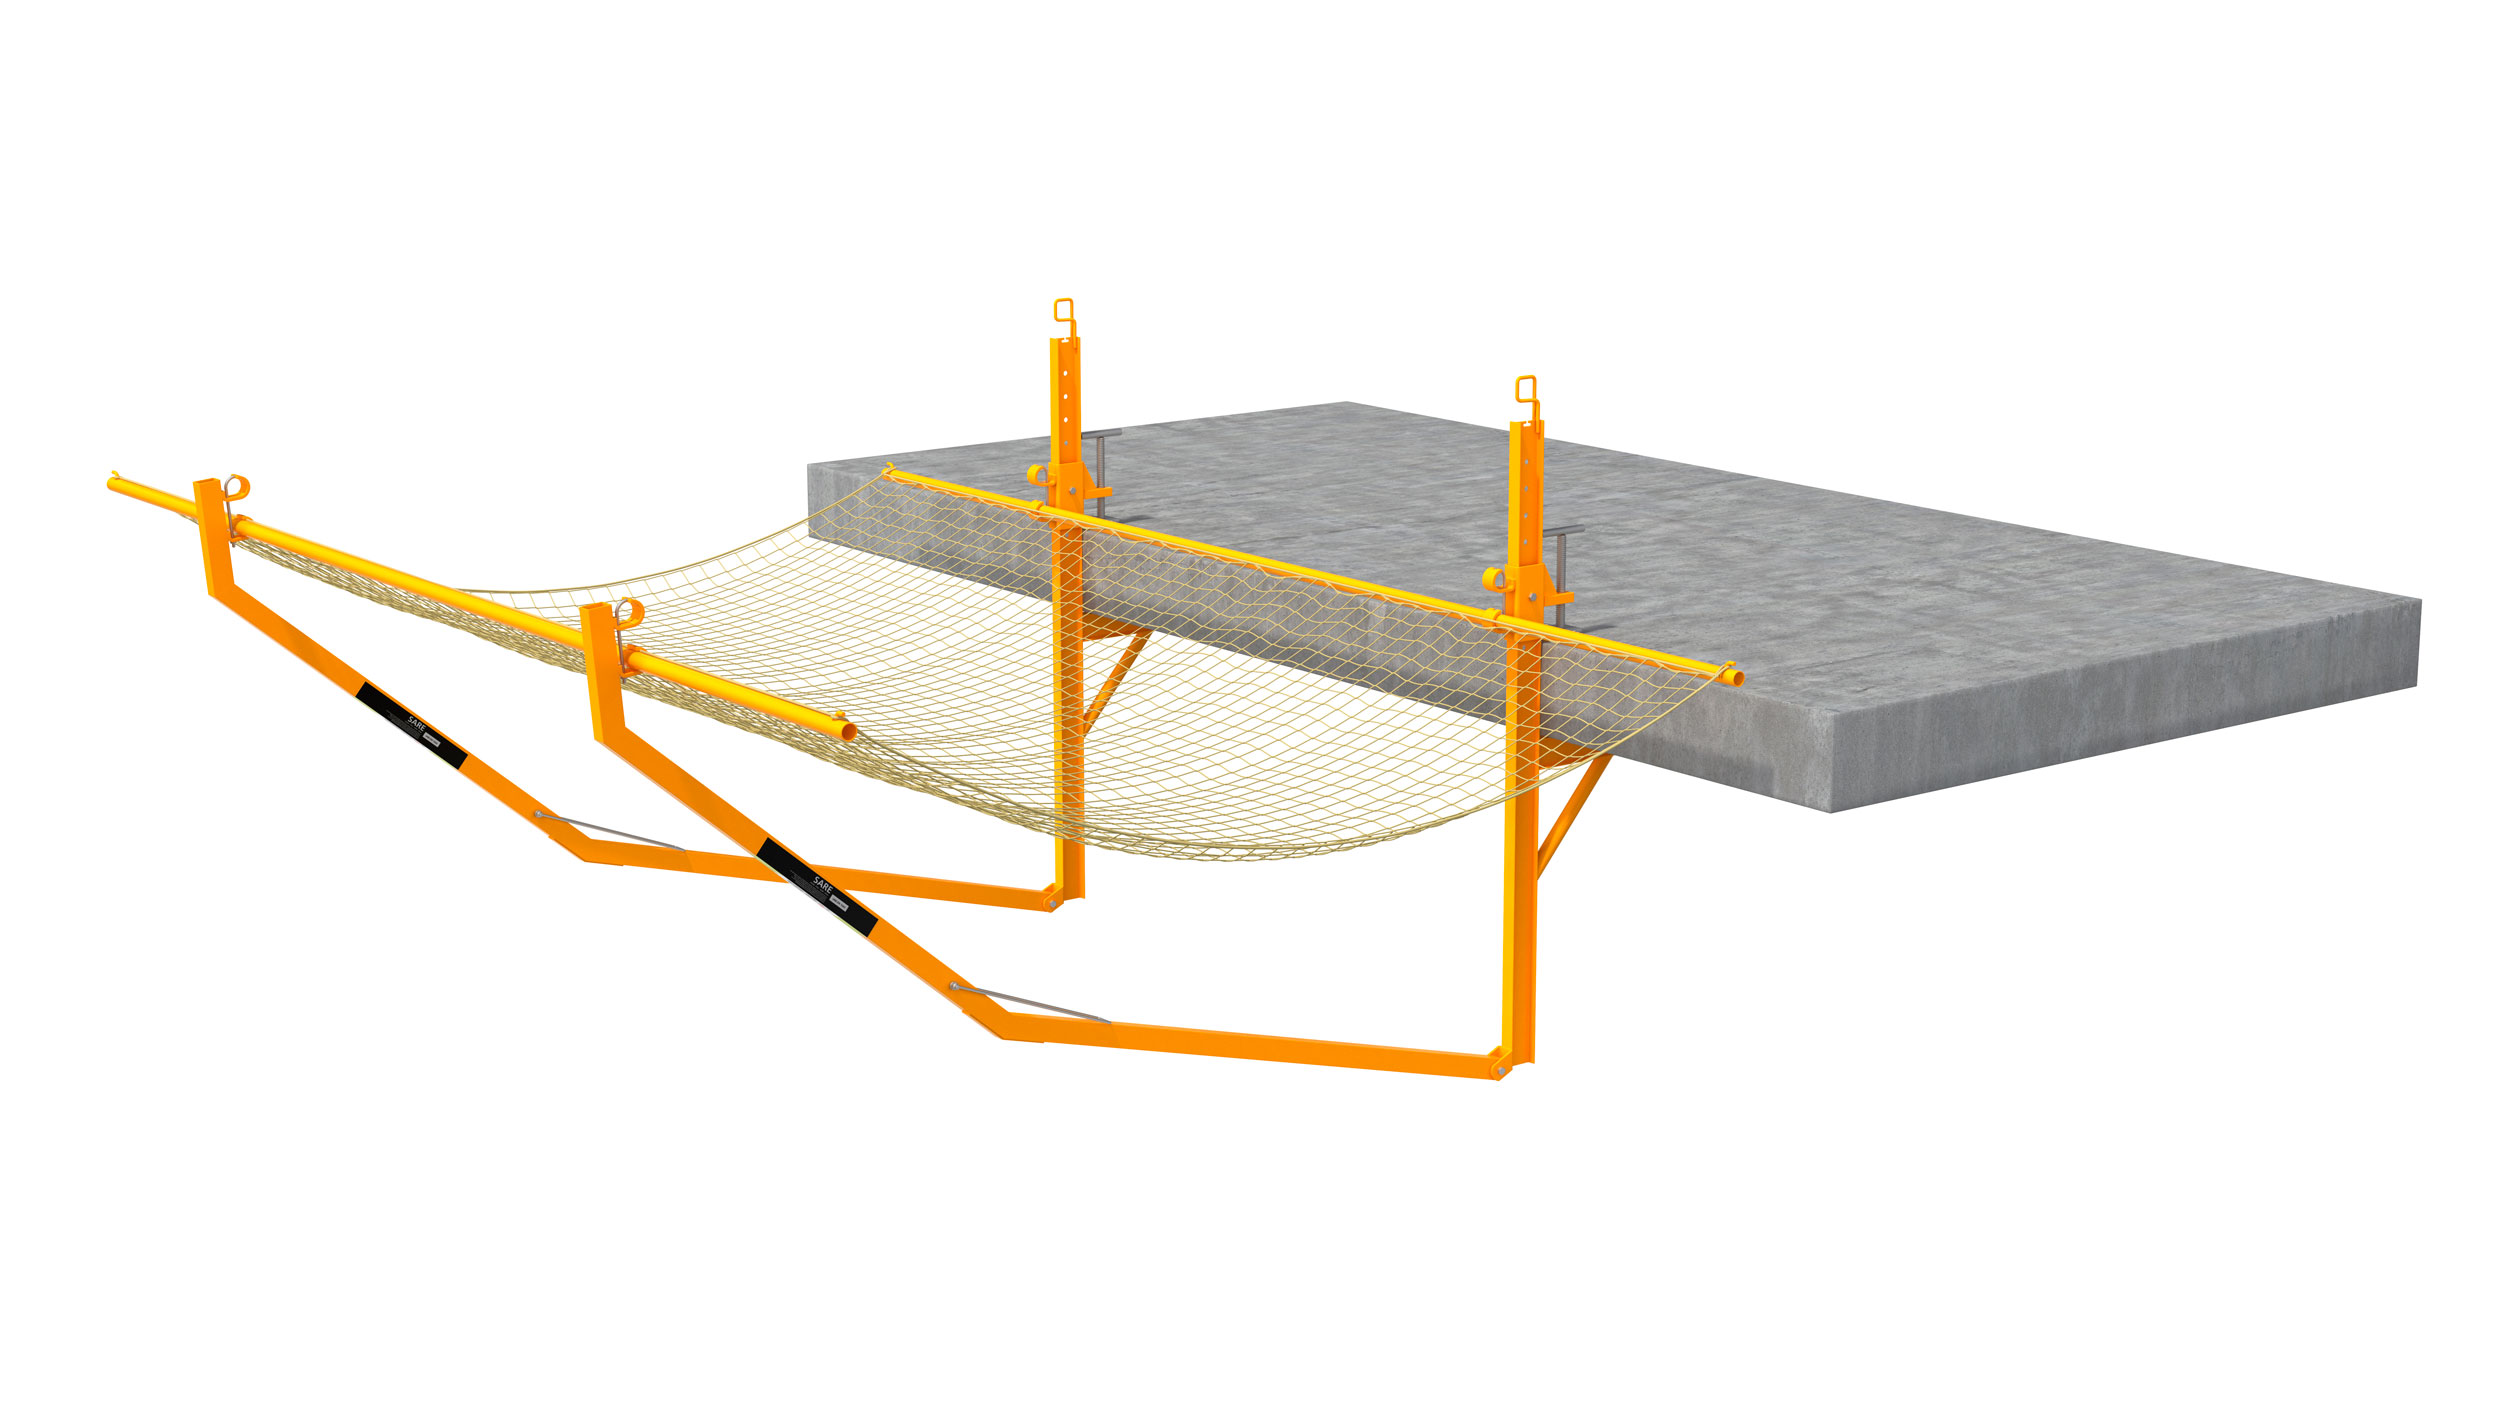 Flexible and elastic fall protection equipment for slab edges. Highlights: safe assembly. Catches the worker in the event of a fall.